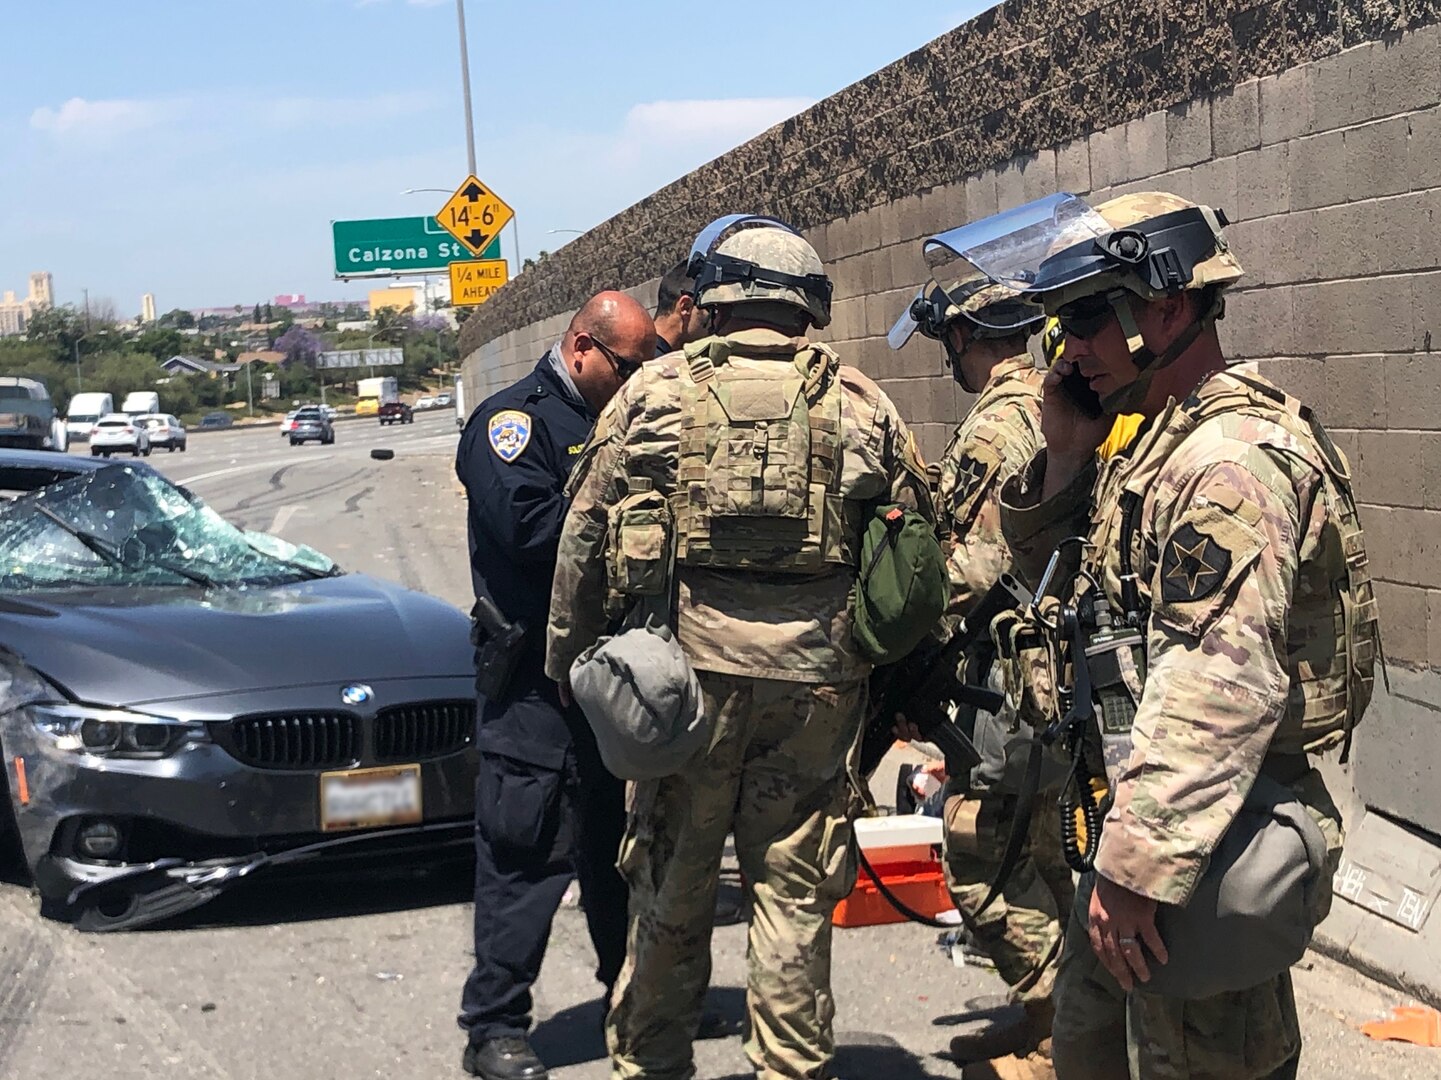 Soldiers with the California National Guard's 1st Battalion, 185th Infantry Regiment, responded to a car accident in Los Angeles June 2, 2020. Spc. Abdel Rahman Ali, 1-185th combat medic, assisted an injured civilian while other members of the team put out a brush fire caused by the accident and redirected traffic.